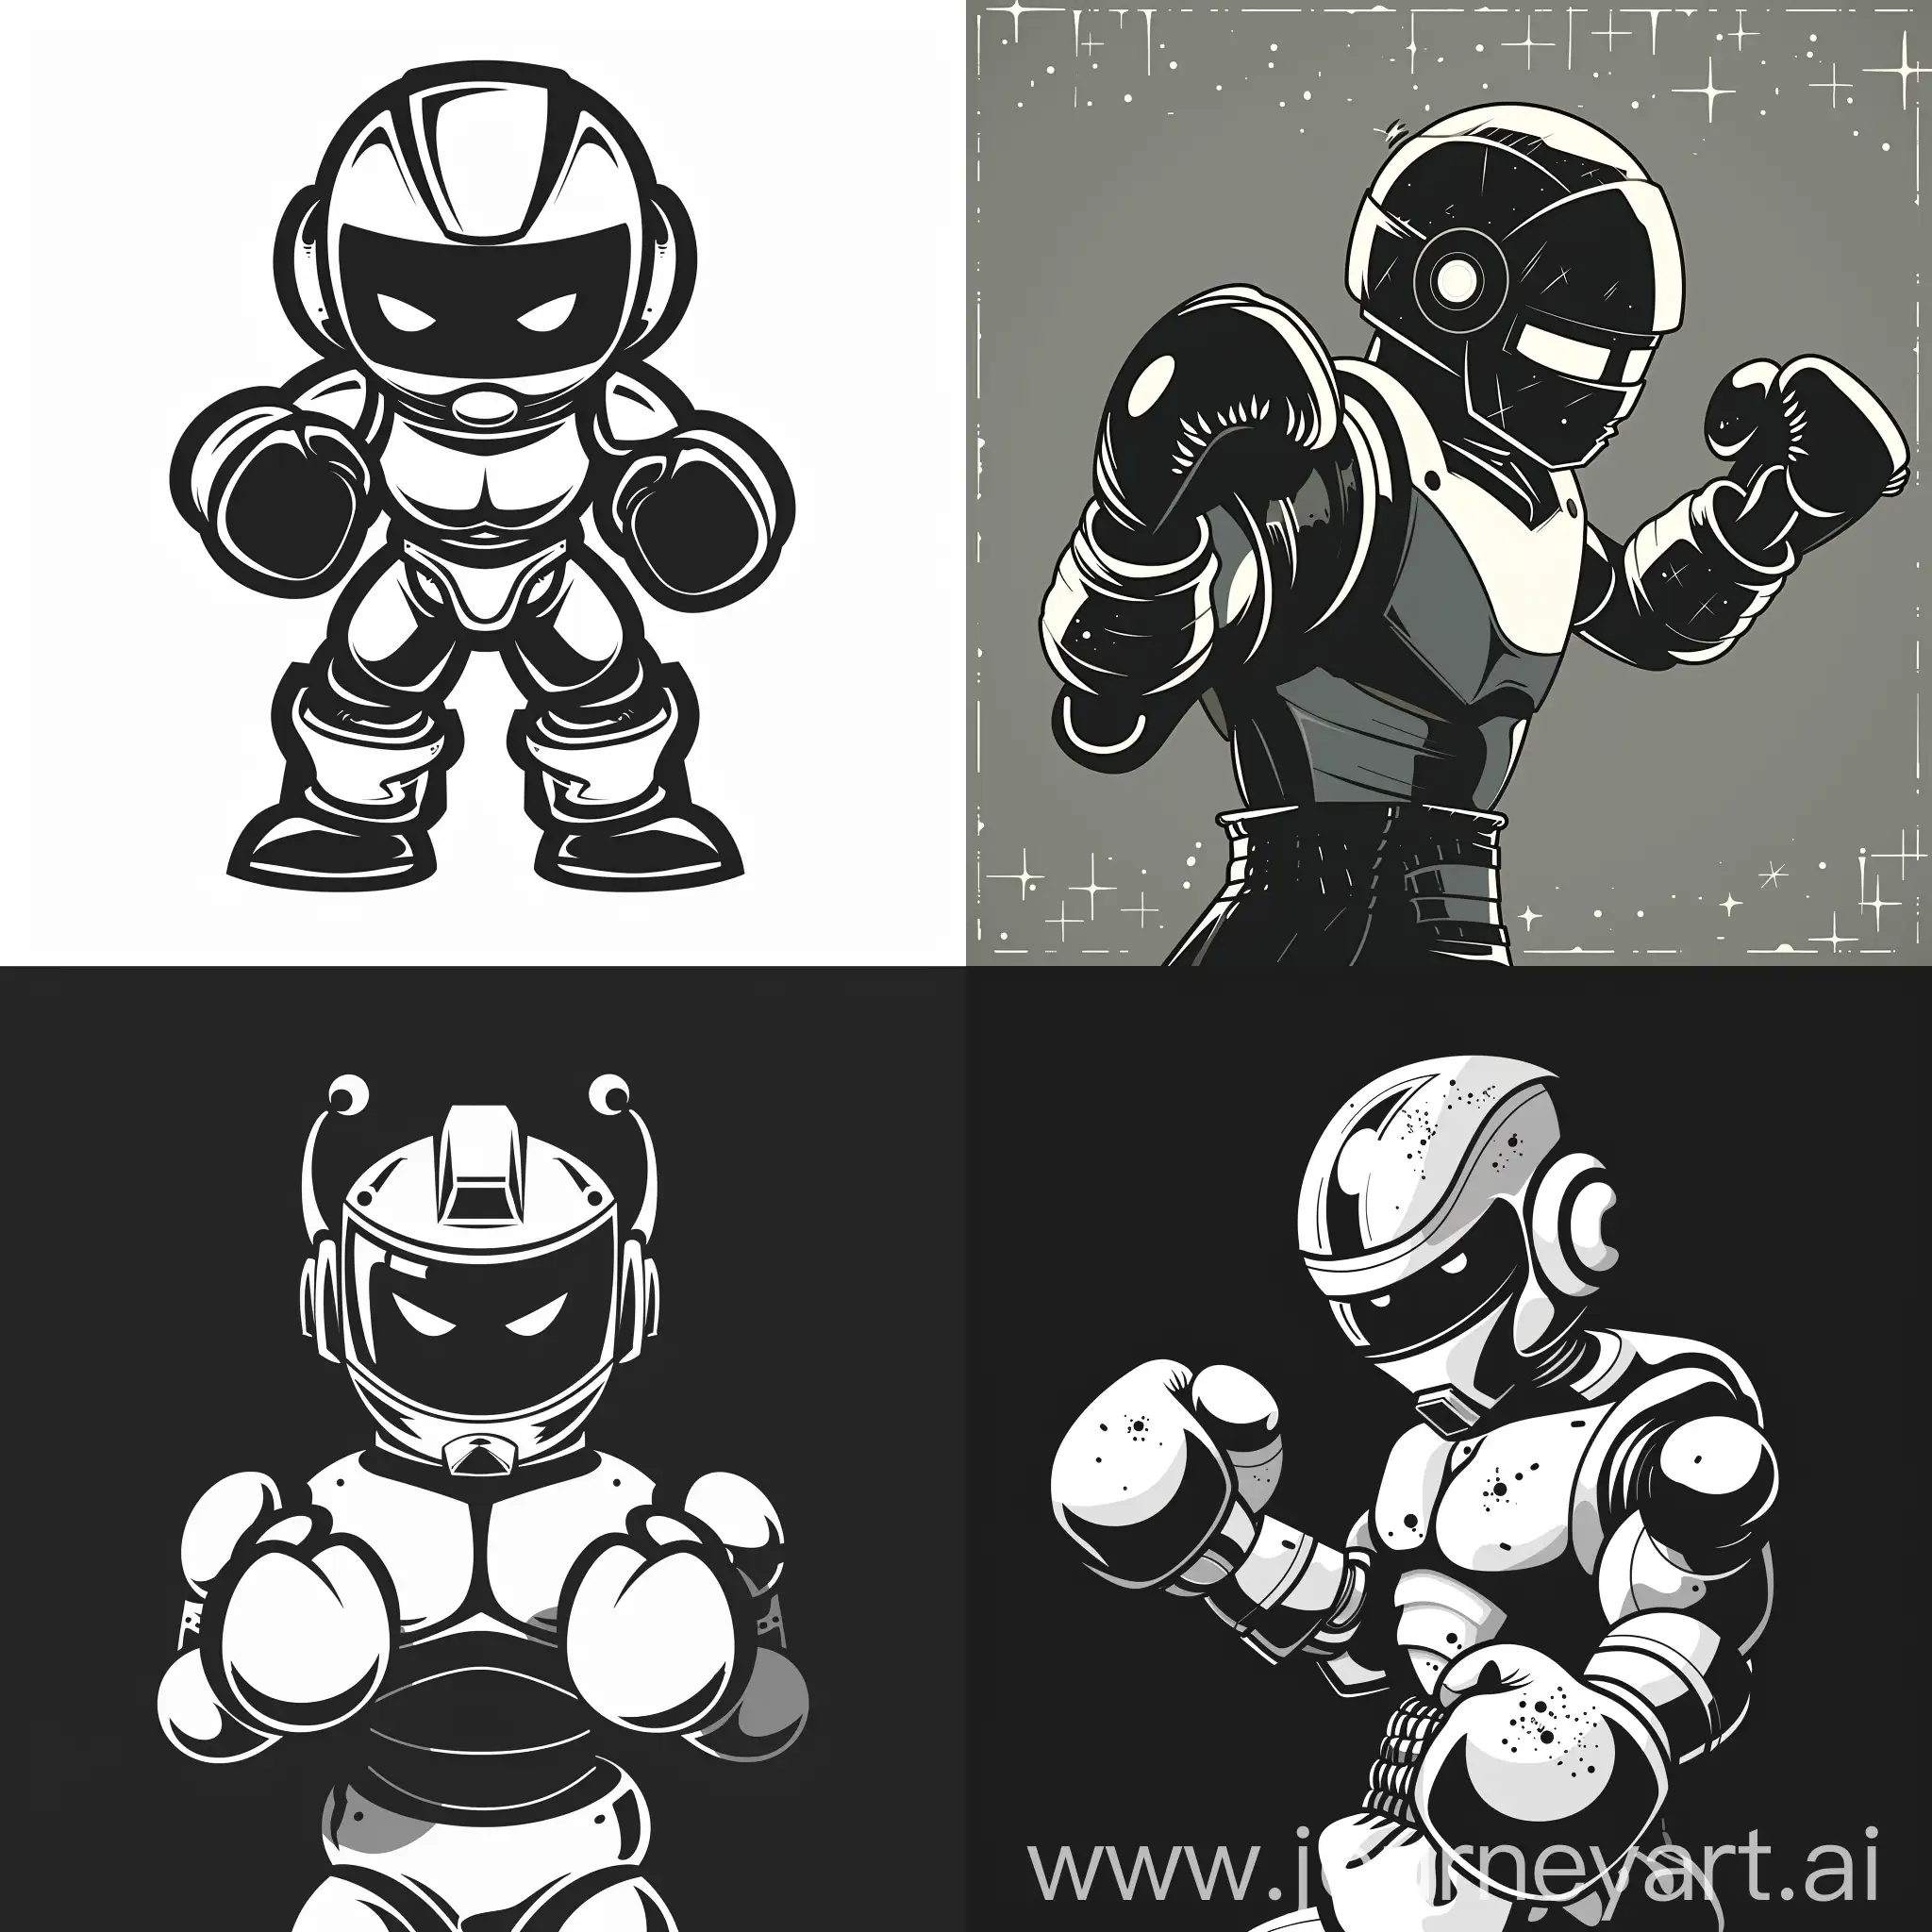 Old-Cartoon-Robot-Boxer-Vector-Art-in-Black-and-White